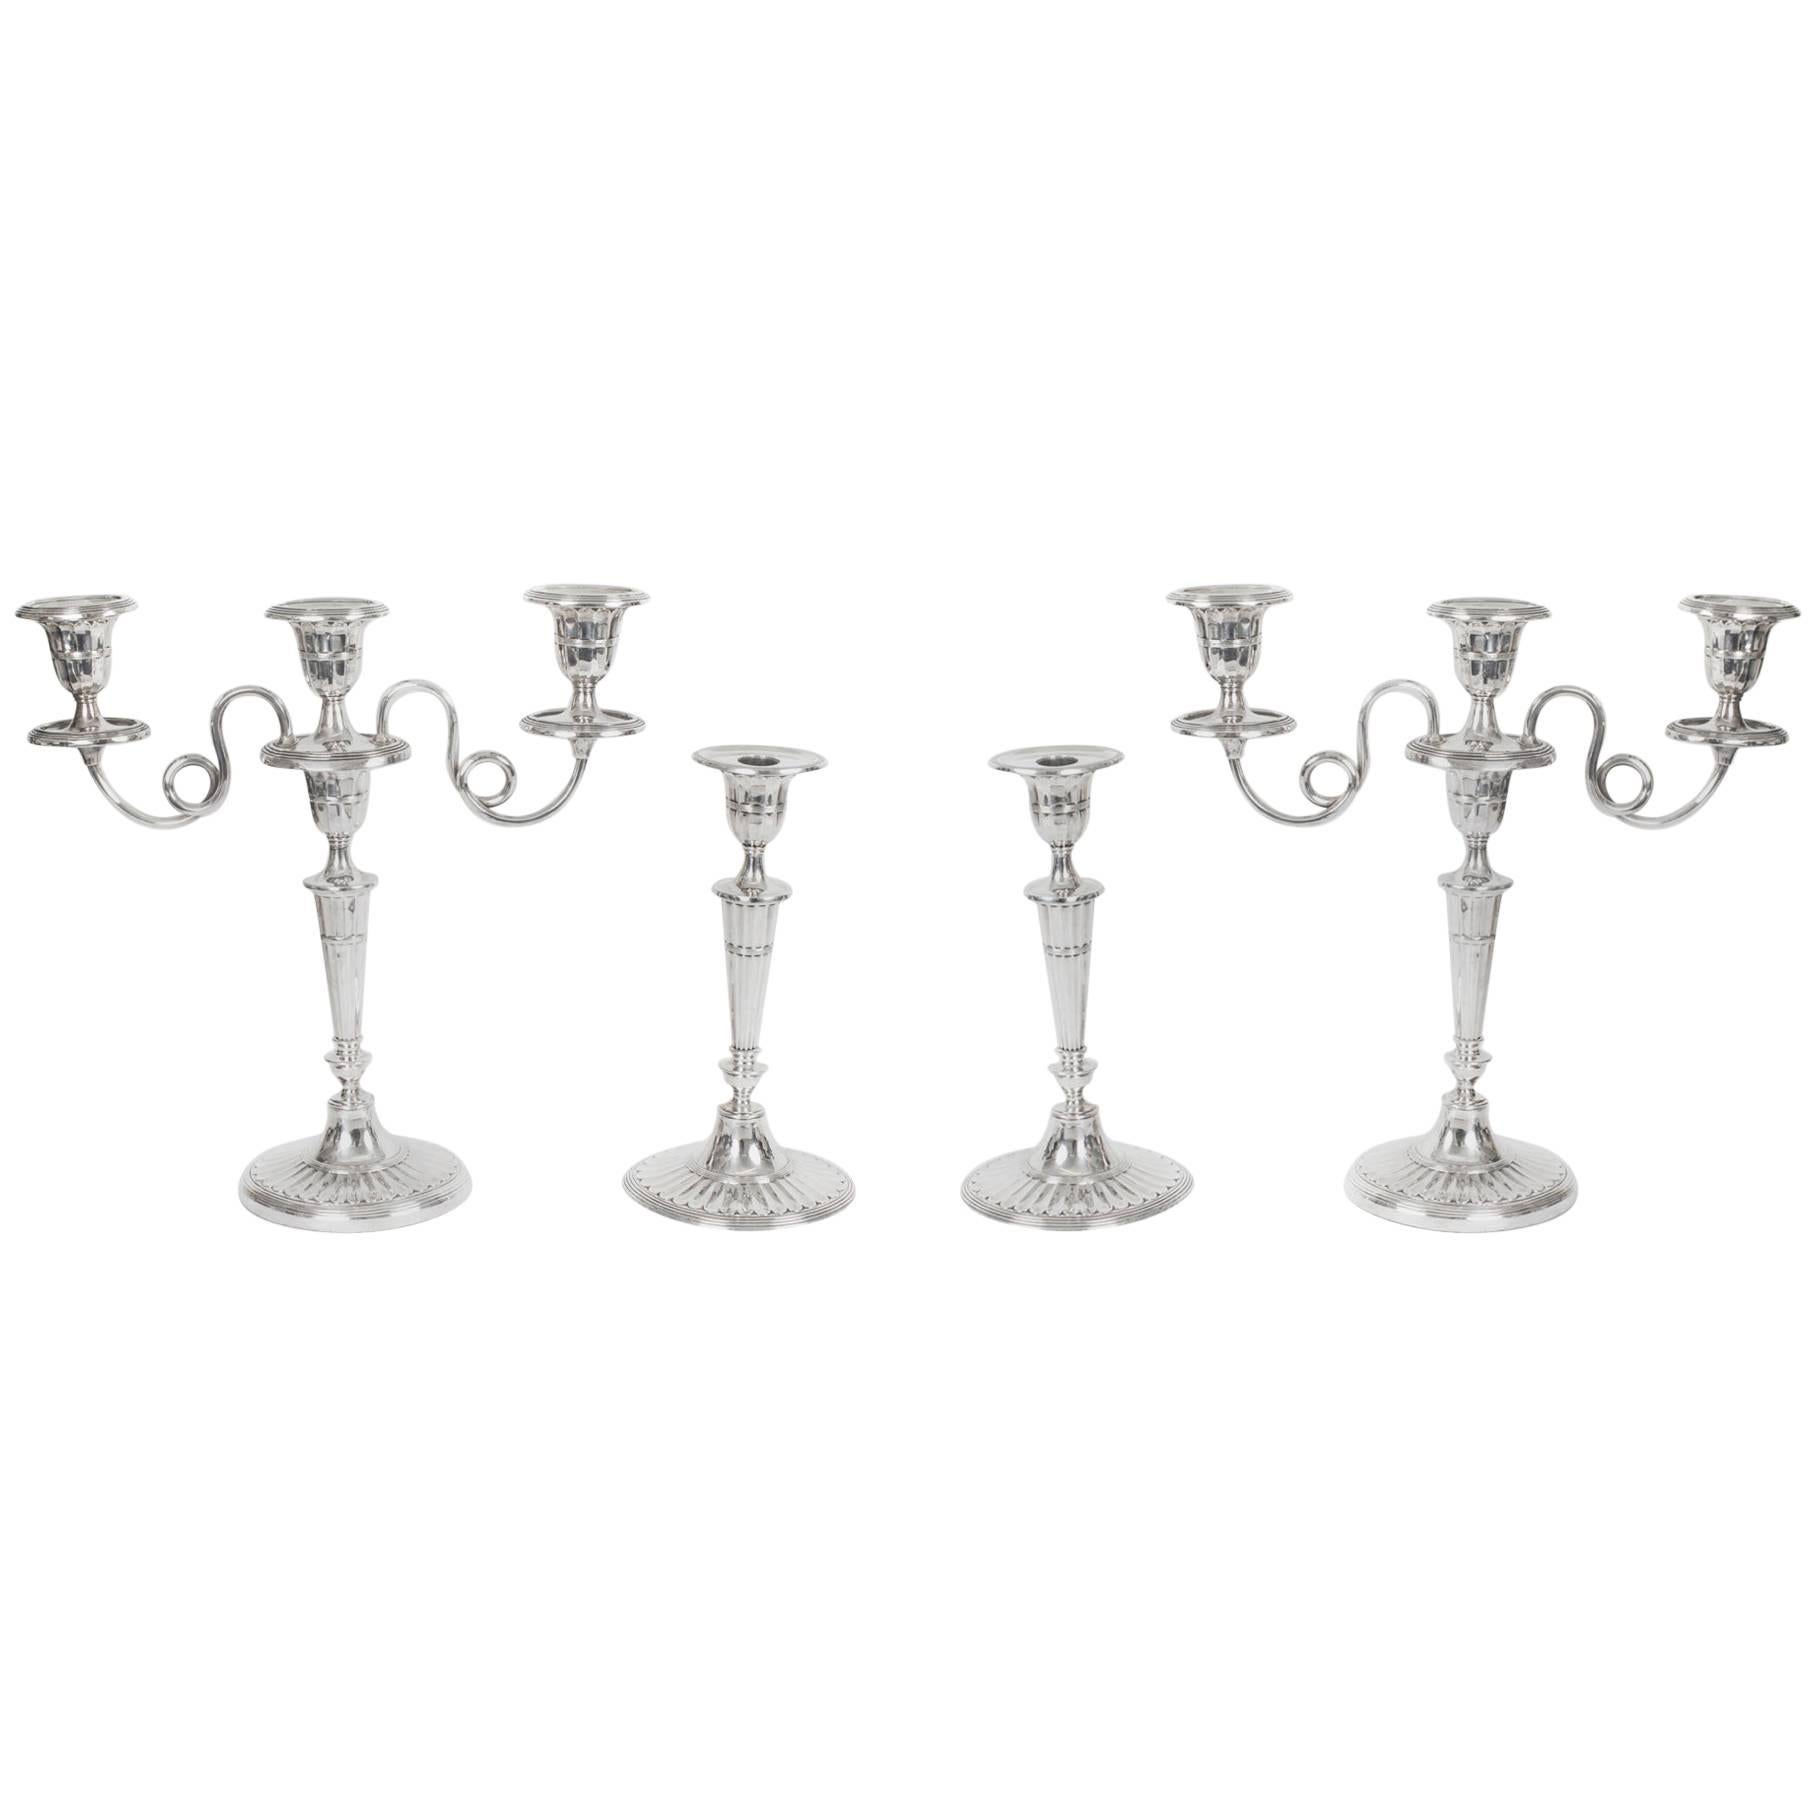 Antique Comprising Pair of Candelabra and Candlesticks, 19th Century